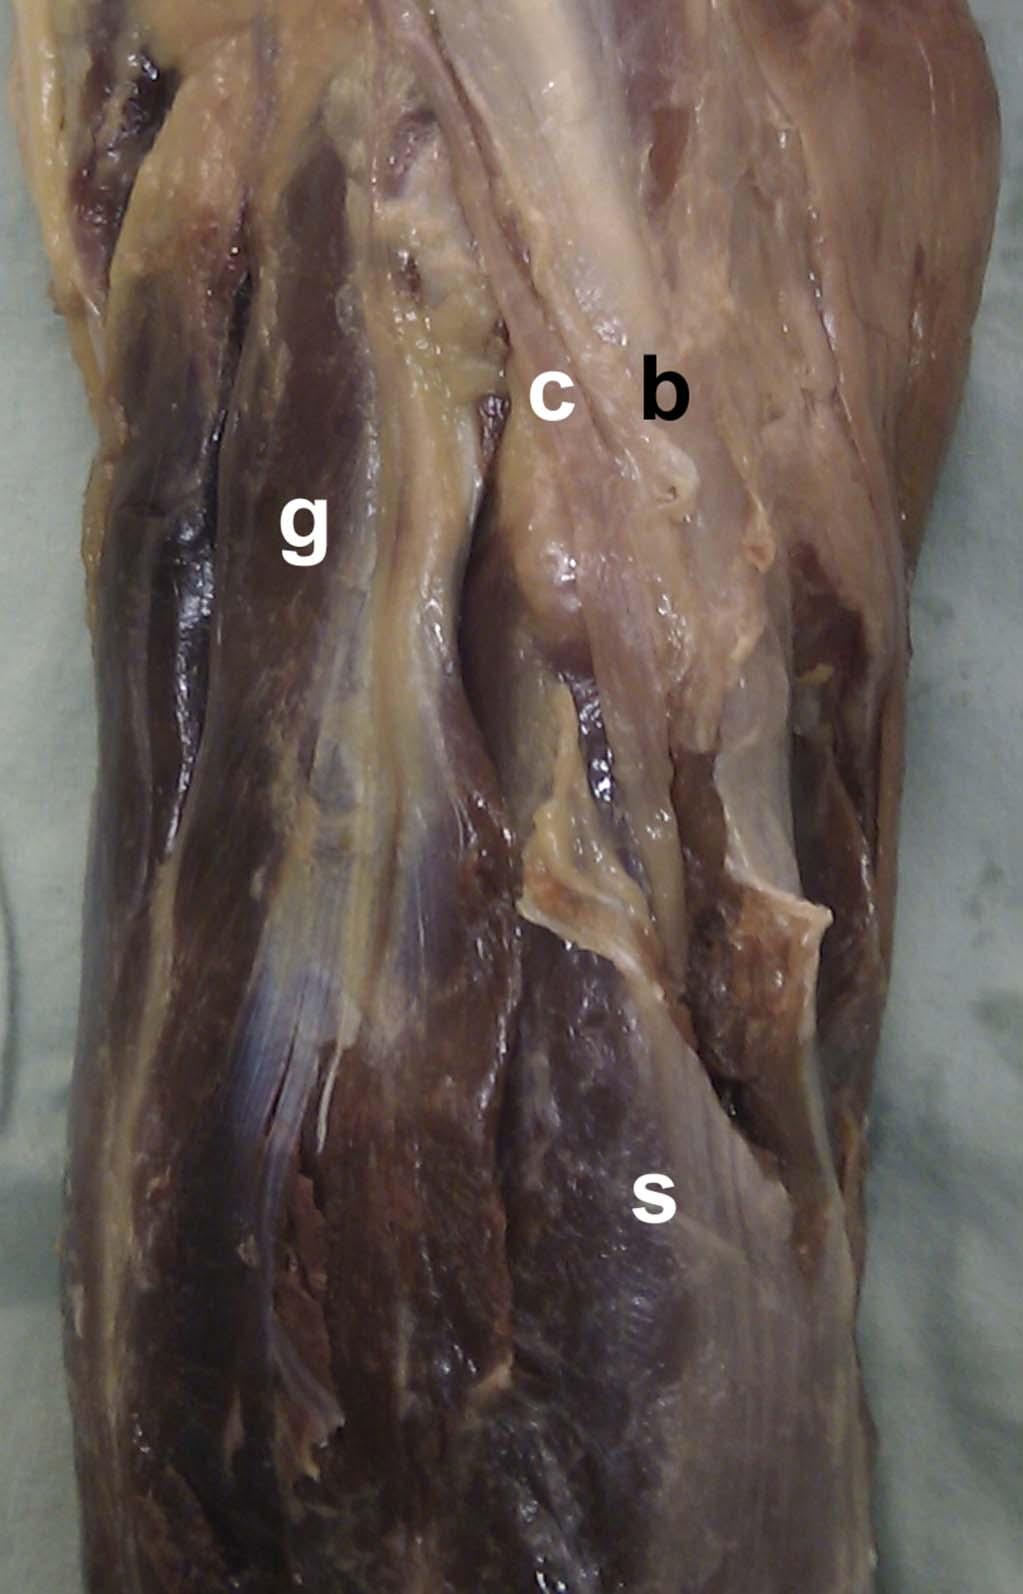 Once the anterior tibial artery was identified as it coursed through the interosseous membrane, a posterior arthrotomy was performed locating the joint line (Fig. 6).